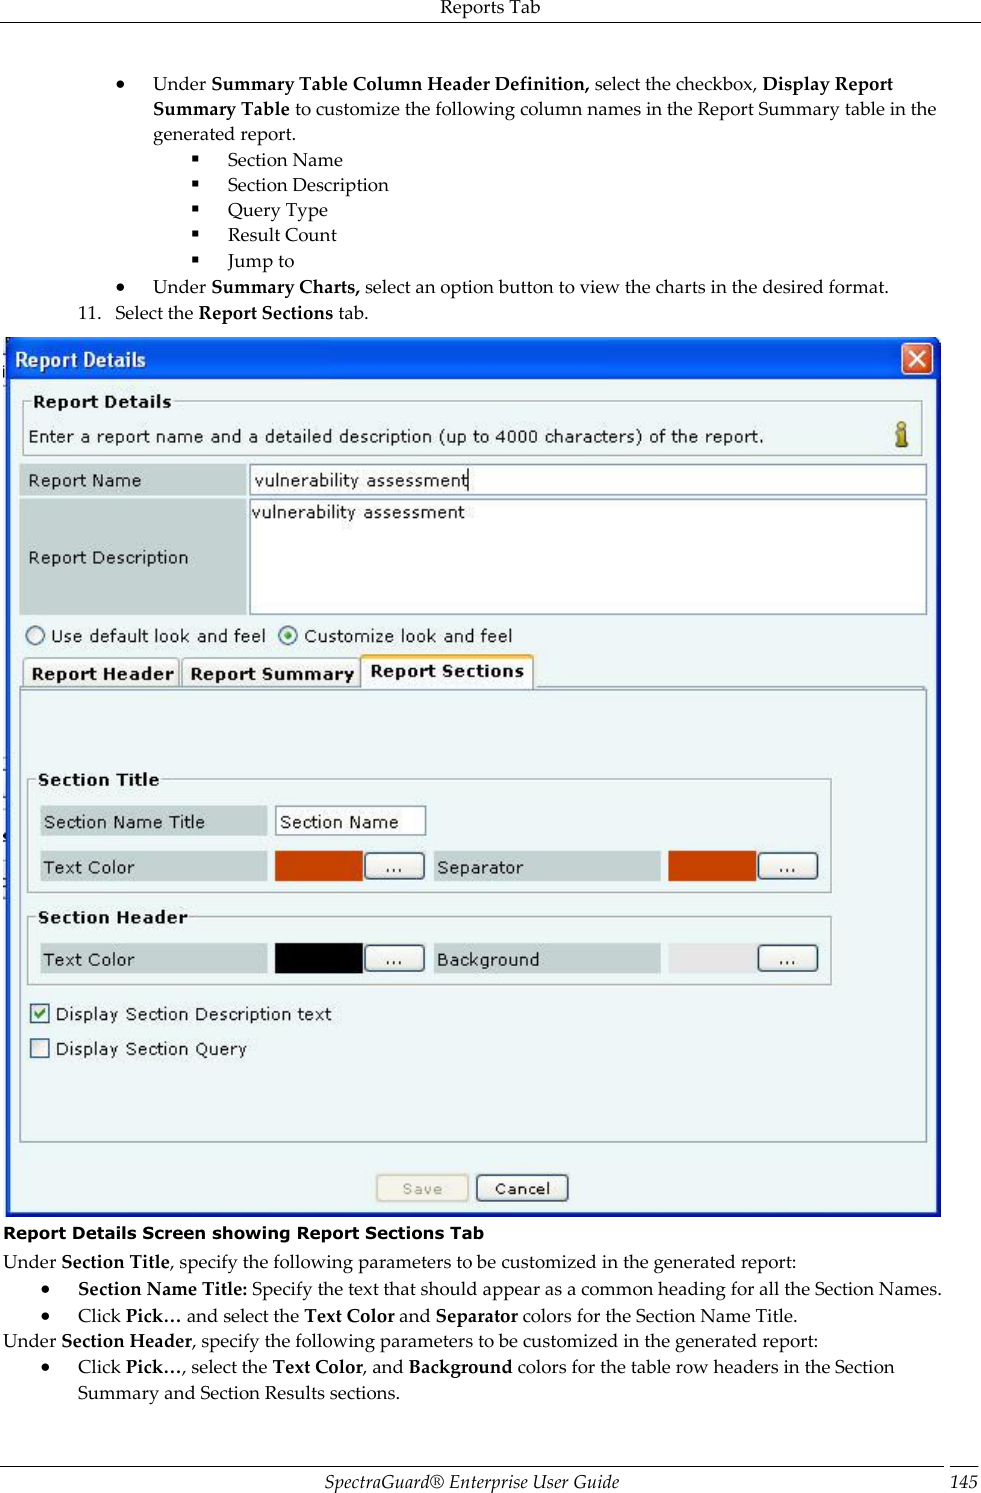 Reports Tab SpectraGuard®  Enterprise User Guide 145  Under Summary Table Column Header Definition, select the checkbox, Display Report Summary Table to customize the following column names in the Report Summary table in the generated report.  Section Name  Section Description  Query Type  Result Count  Jump to  Under Summary Charts, select an option button to view the charts in the desired format. 11. Select the Report Sections tab.  Report Details Screen showing Report Sections Tab Under Section Title, specify the following parameters to be customized in the generated report:  Section Name Title: Specify the text that should appear as a common heading for all the Section Names.  Click Pick… and select the Text Color and Separator colors for the Section Name Title. Under Section Header, specify the following parameters to be customized in the generated report:  Click Pick…, select the Text Color, and Background colors for the table row headers in the Section Summary and Section Results sections. 